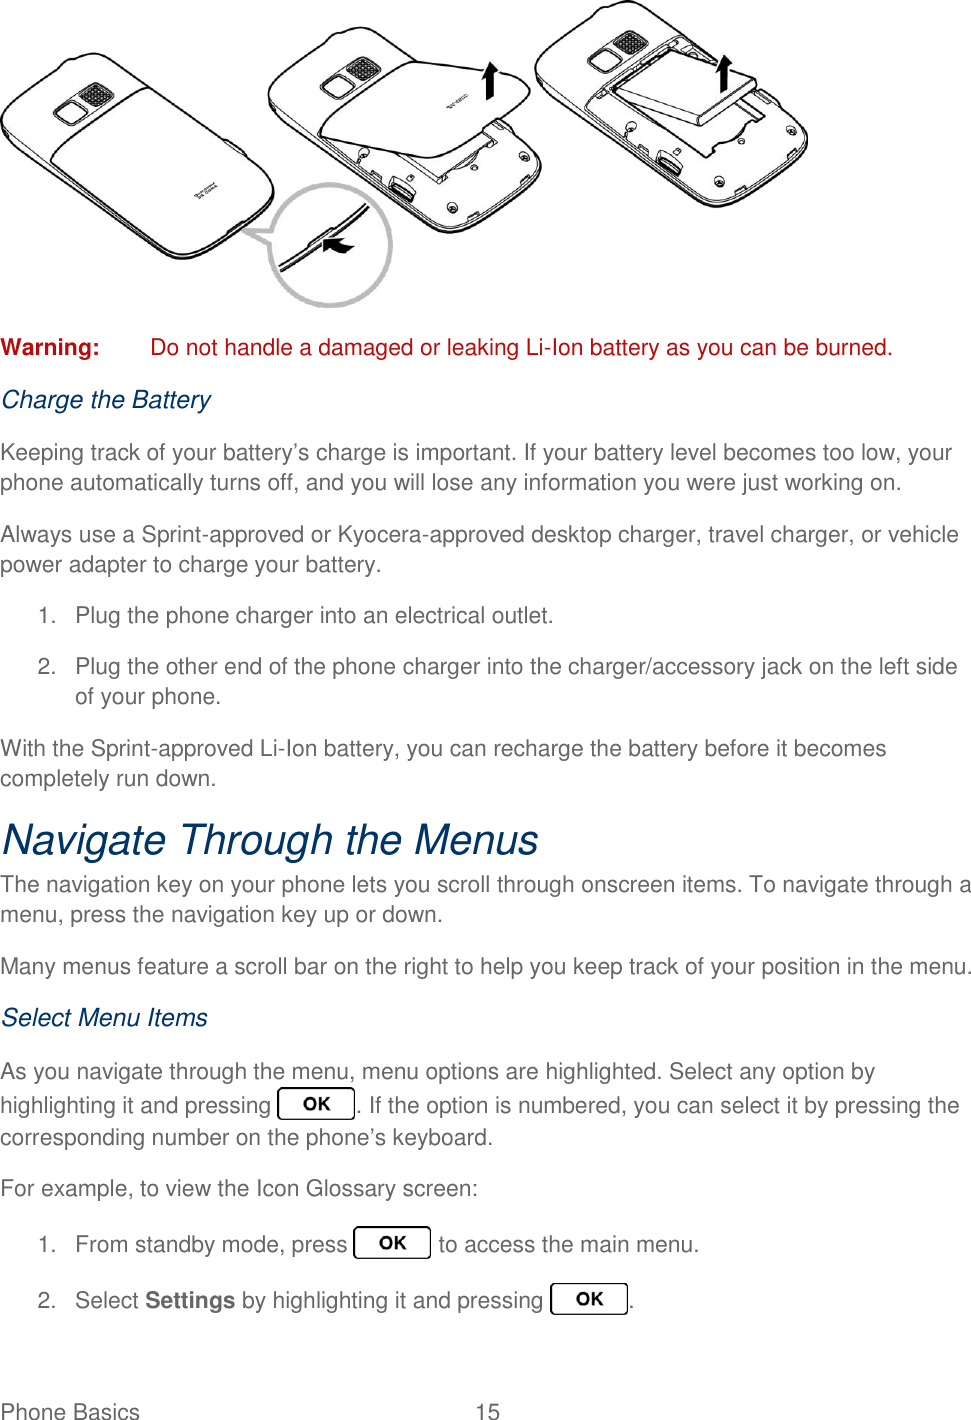 Phone Basics  15    Warning:  Do not handle a damaged or leaking Li-Ion battery as you can be burned. Charge the Battery Keeping track of your battery’s charge is important. If your battery level becomes too low, your phone automatically turns off, and you will lose any information you were just working on. Always use a Sprint-approved or Kyocera-approved desktop charger, travel charger, or vehicle power adapter to charge your battery. 1.  Plug the phone charger into an electrical outlet. 2.  Plug the other end of the phone charger into the charger/accessory jack on the left side of your phone. With the Sprint-approved Li-Ion battery, you can recharge the battery before it becomes completely run down. Navigate Through the Menus The navigation key on your phone lets you scroll through onscreen items. To navigate through a menu, press the navigation key up or down. Many menus feature a scroll bar on the right to help you keep track of your position in the menu. Select Menu Items As you navigate through the menu, menu options are highlighted. Select any option by highlighting it and pressing  . If the option is numbered, you can select it by pressing the corresponding number on the phone’s keyboard. For example, to view the Icon Glossary screen: 1.  From standby mode, press   to access the main menu. 2.  Select Settings by highlighting it and pressing  . 